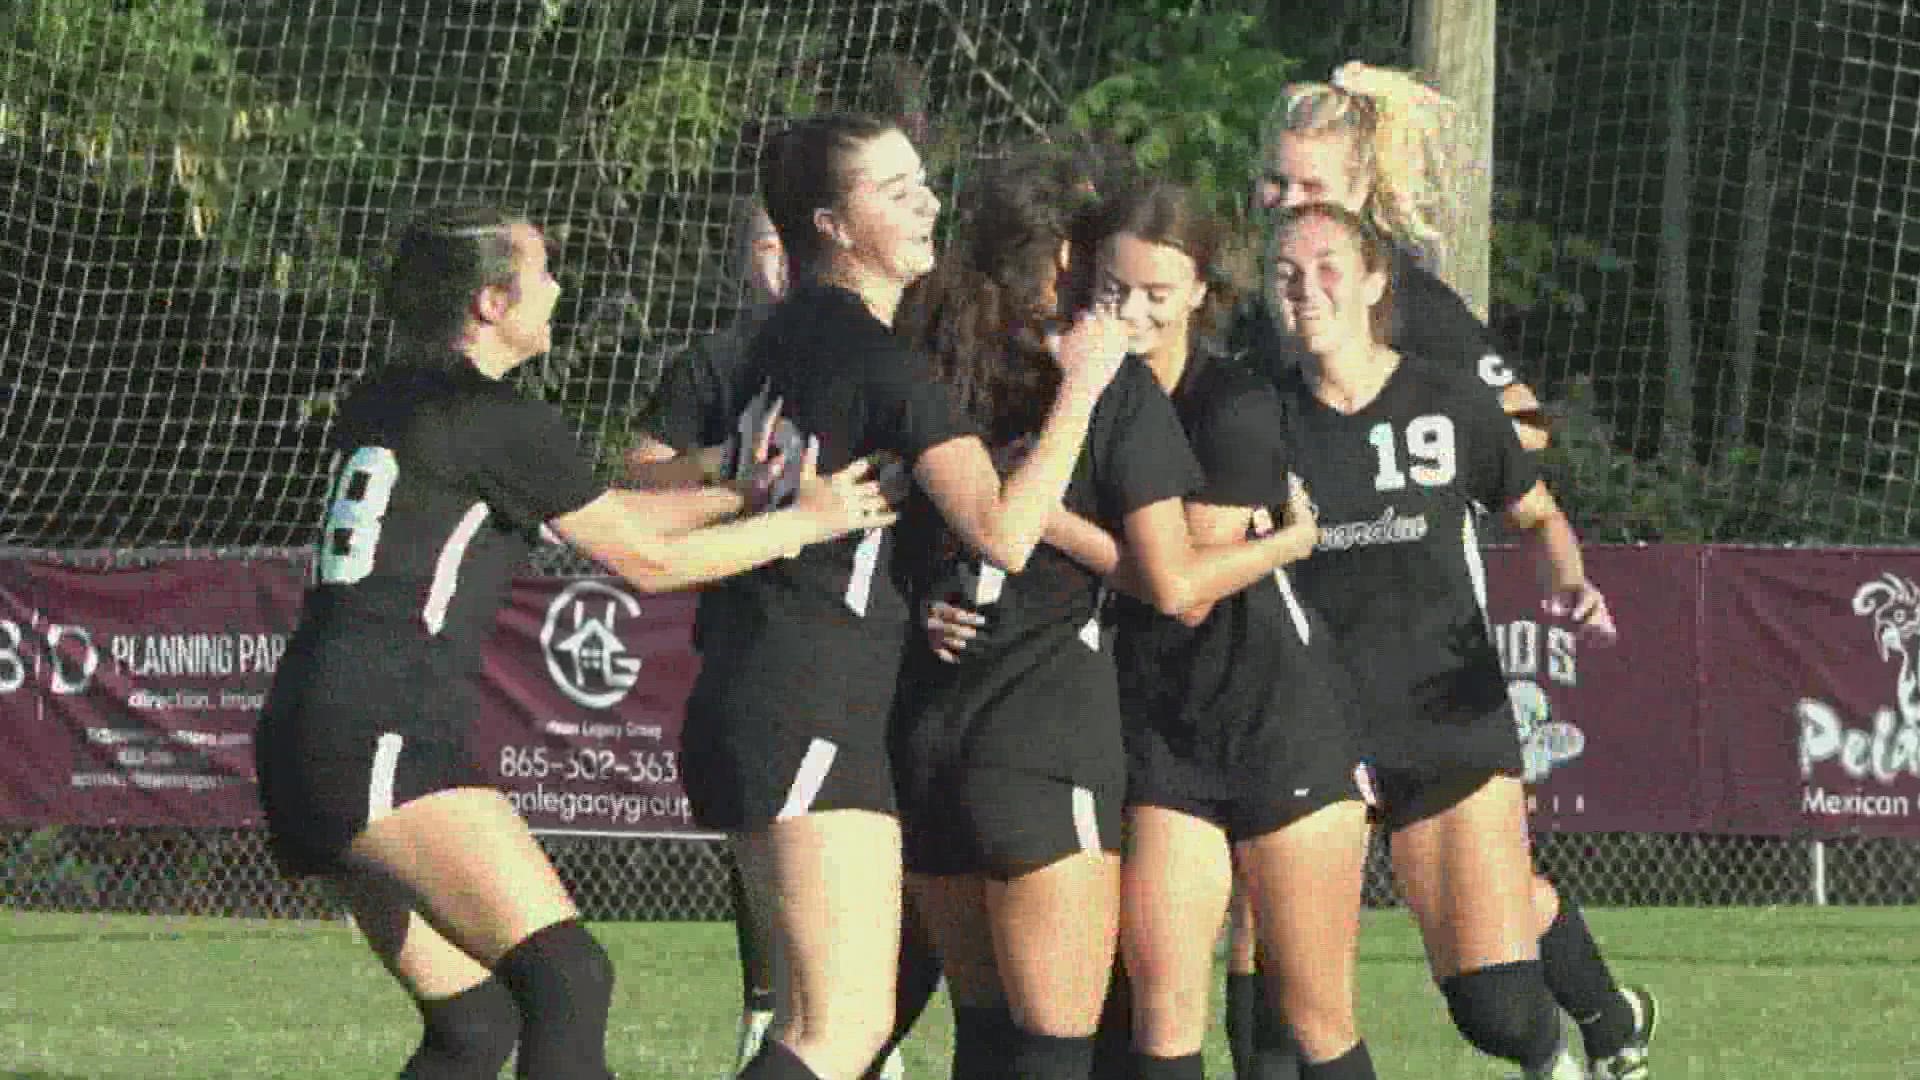 The United Soccer Coaches High School Rankings put Bearden's girls' soccer team as the top team in the country.